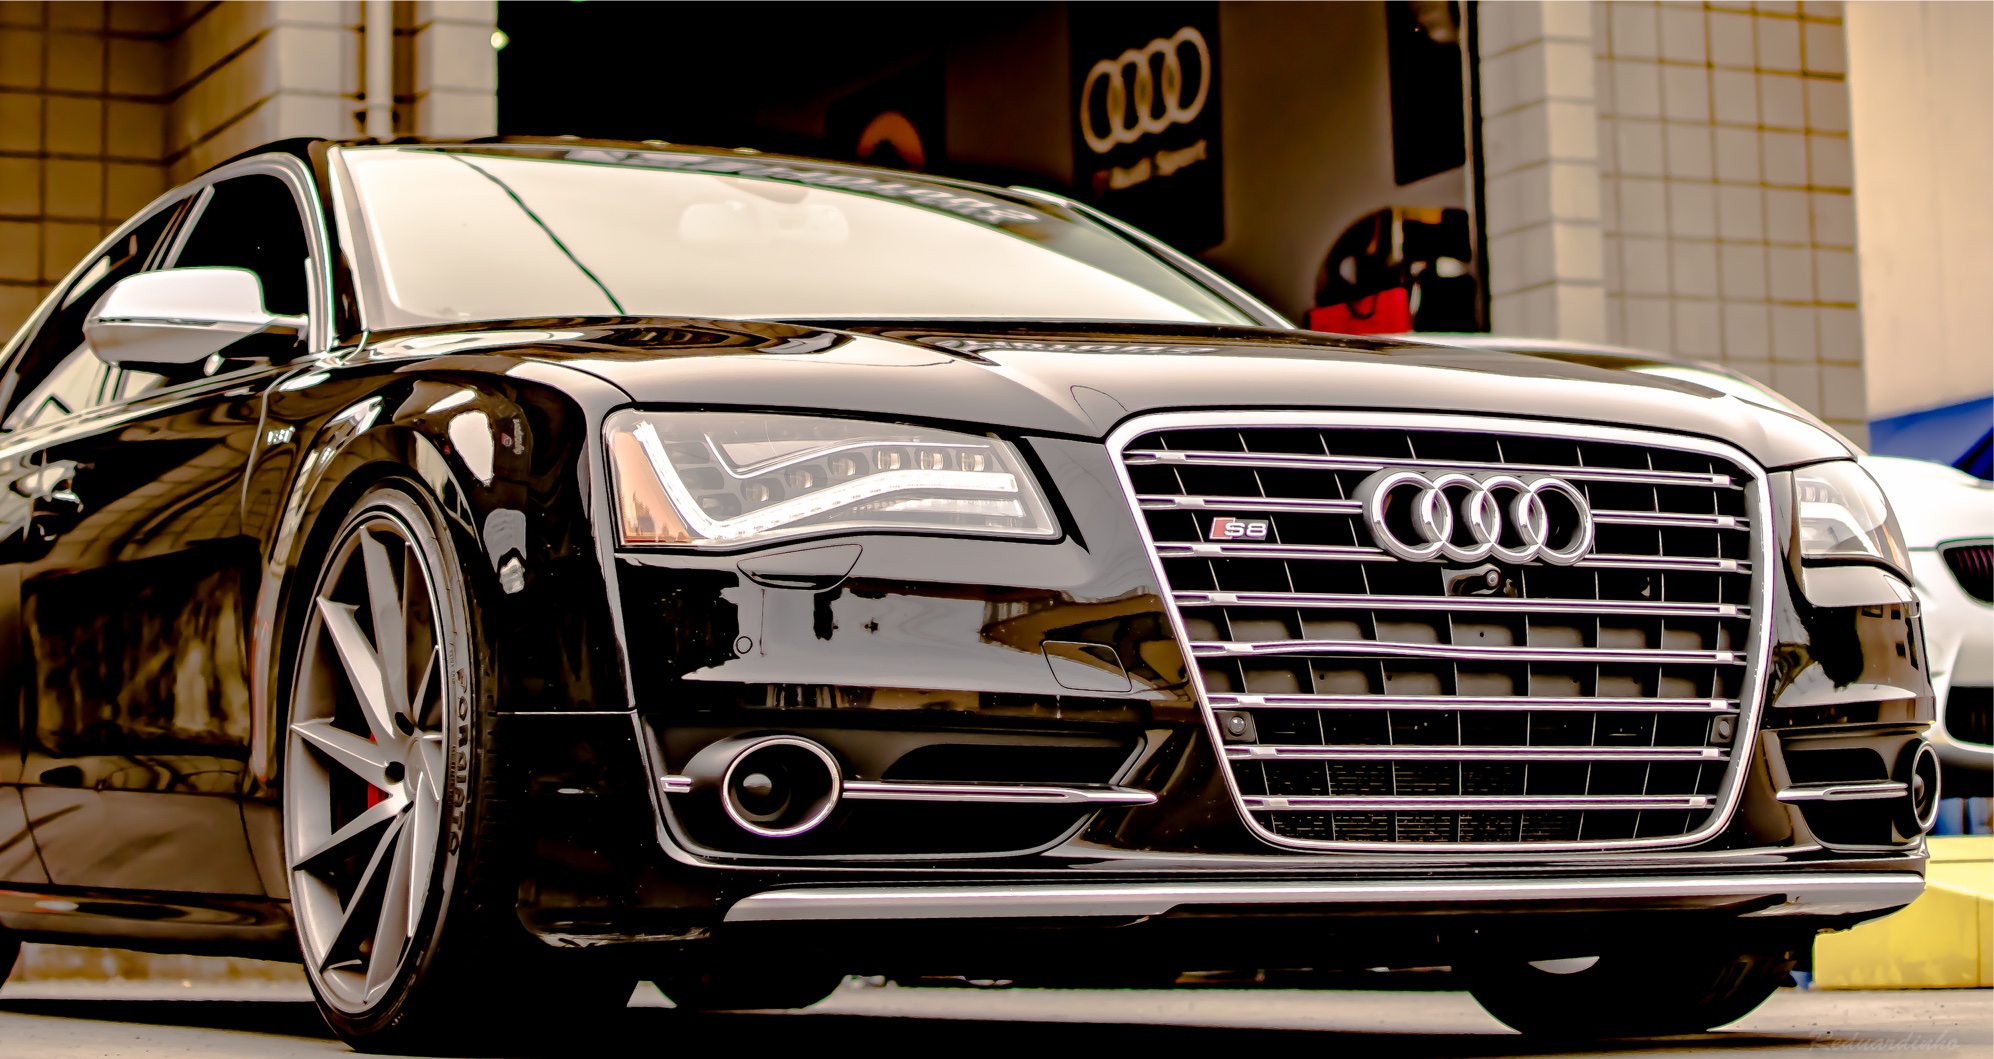 S8 Grille Pic Crop 1 